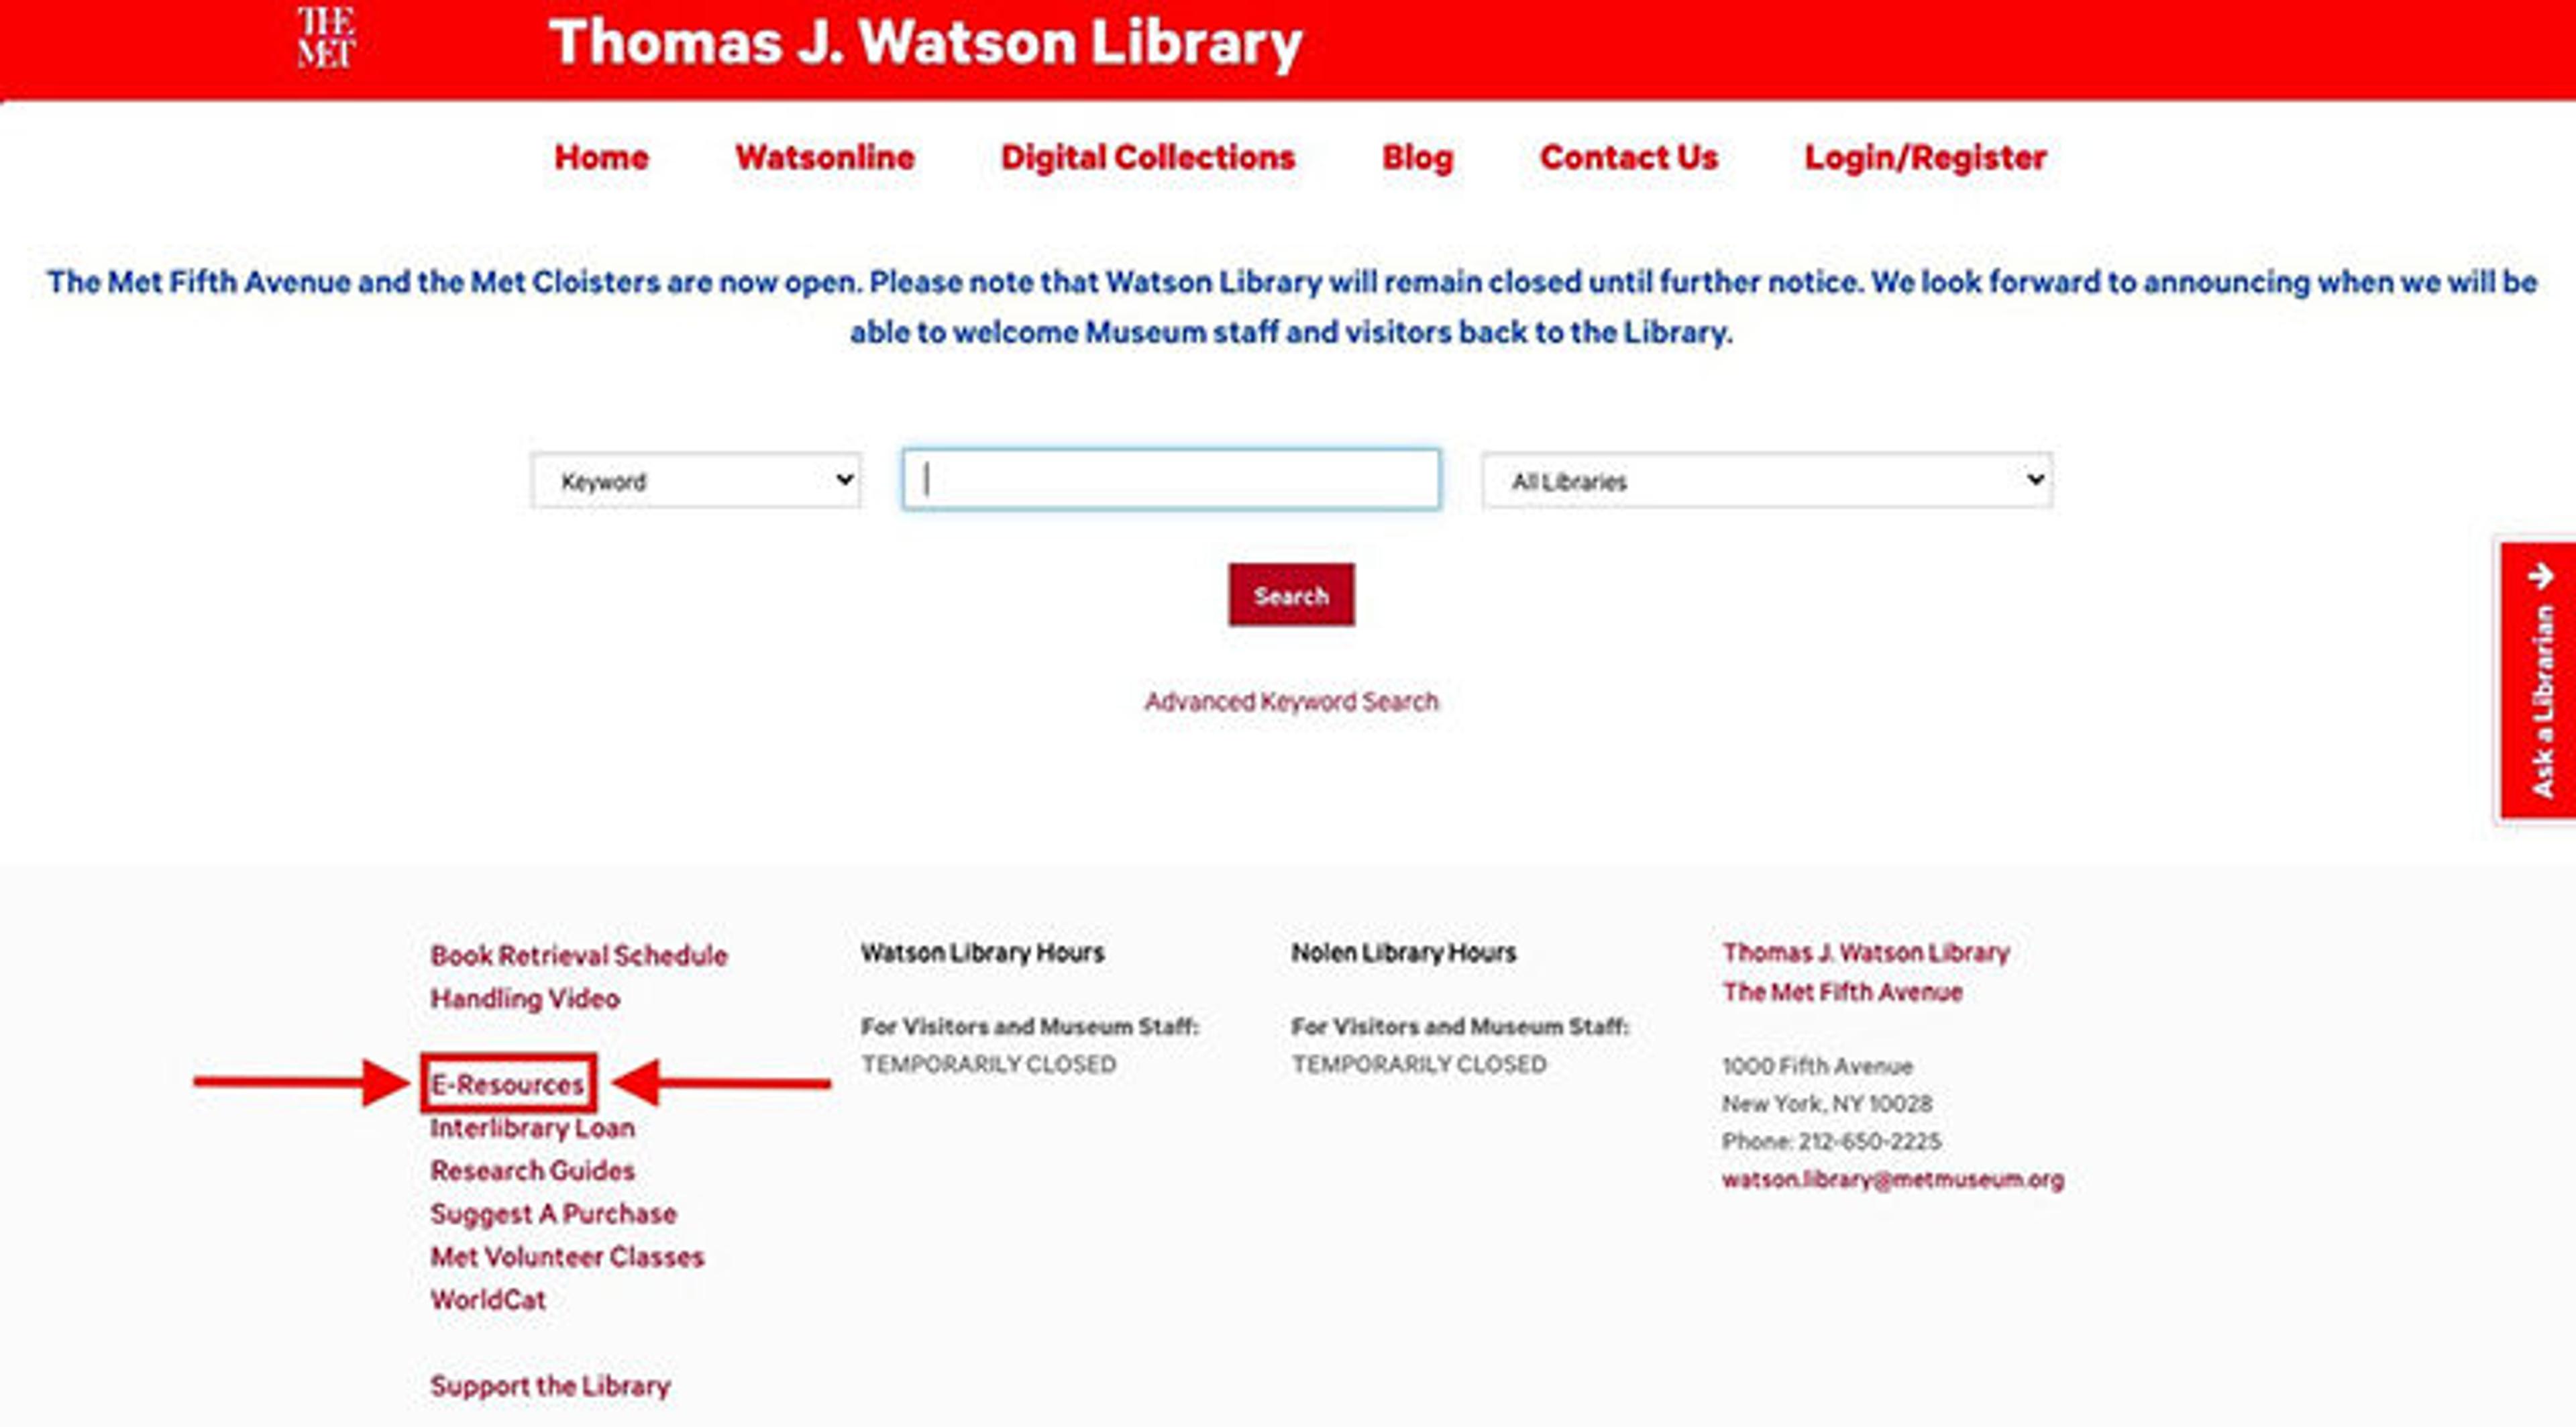 homepage of Watsonline with emphasis placed on the E-Resource button